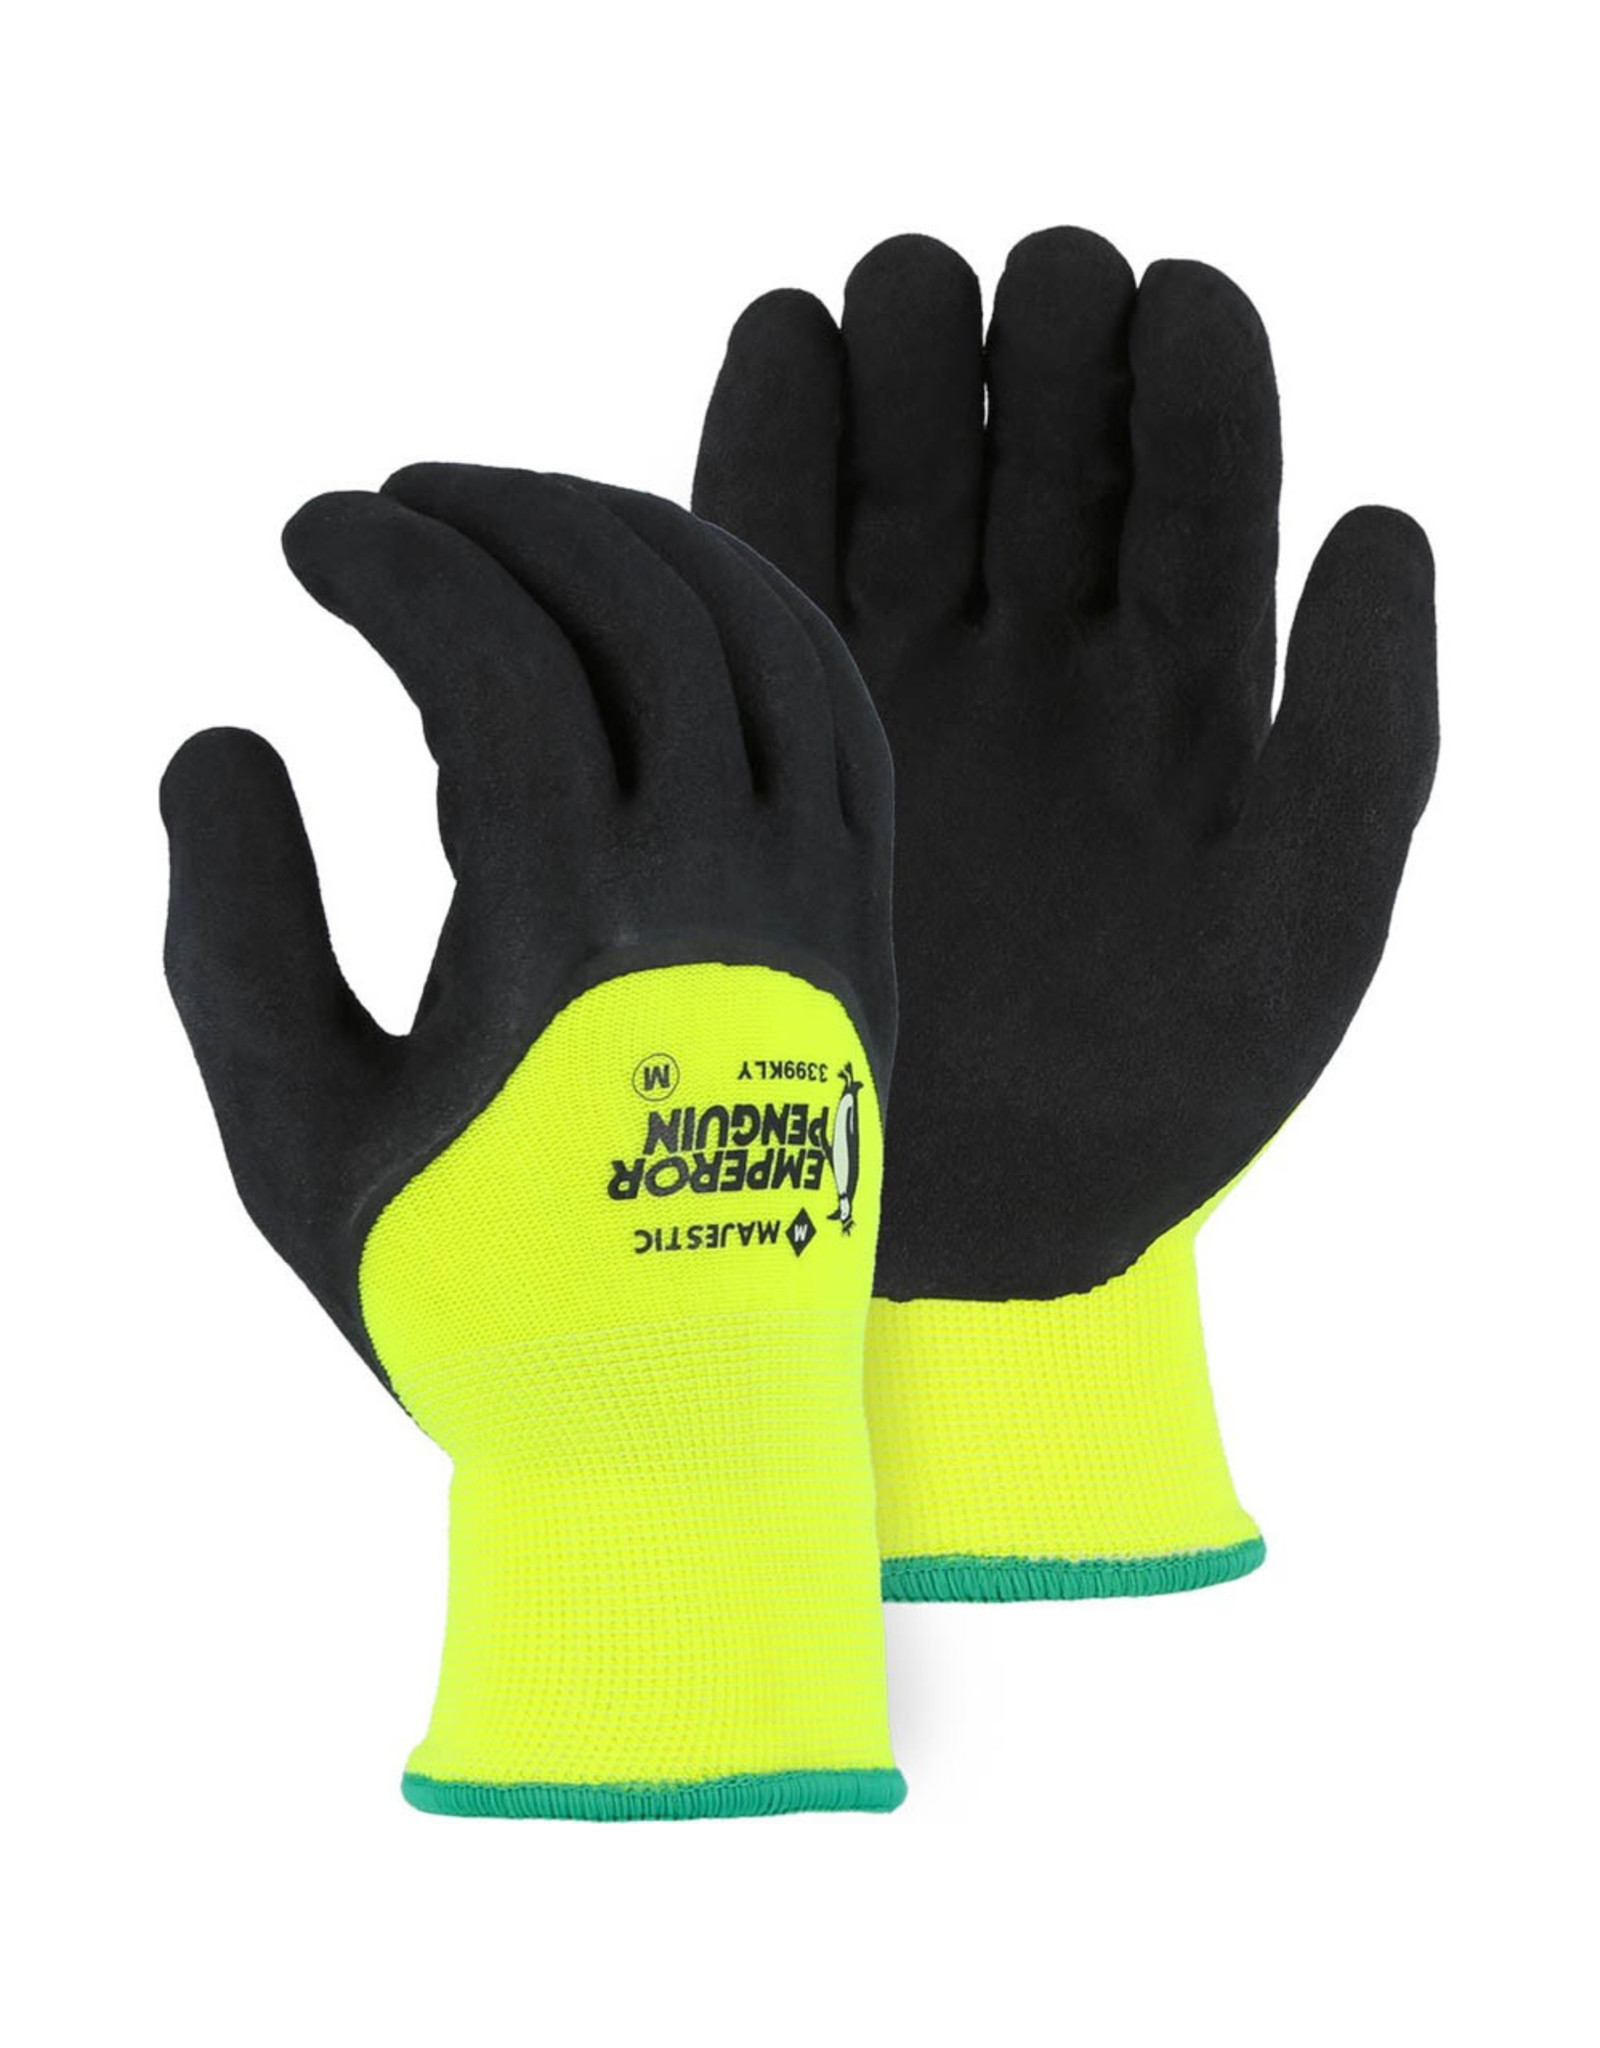 Majestic Glove Emperor Penguin Winter Lined Nylon Glove with 3/4 Sandy Latex Palm